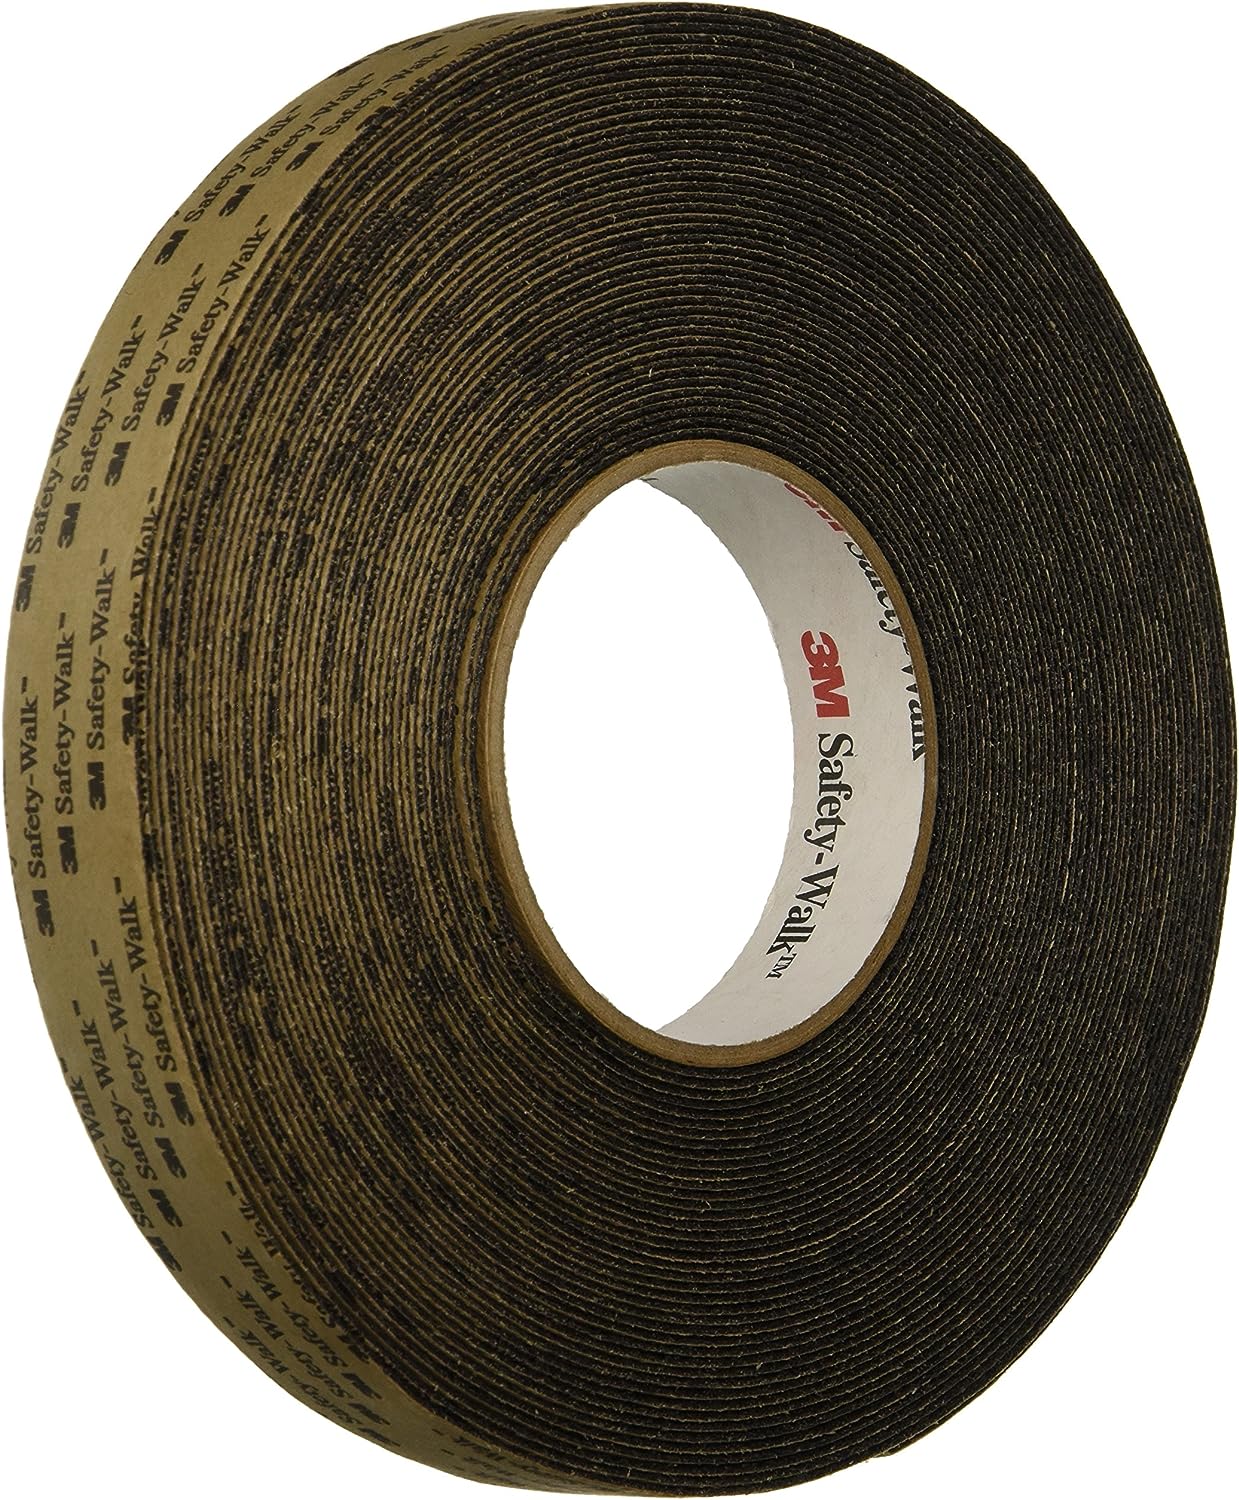 3M Safety-Walk 310 Slip-Resistant Medium Resilient Tread Roll 1 Inch x 60 Ft RRP £30.94 CLEARANCE XL £24.99